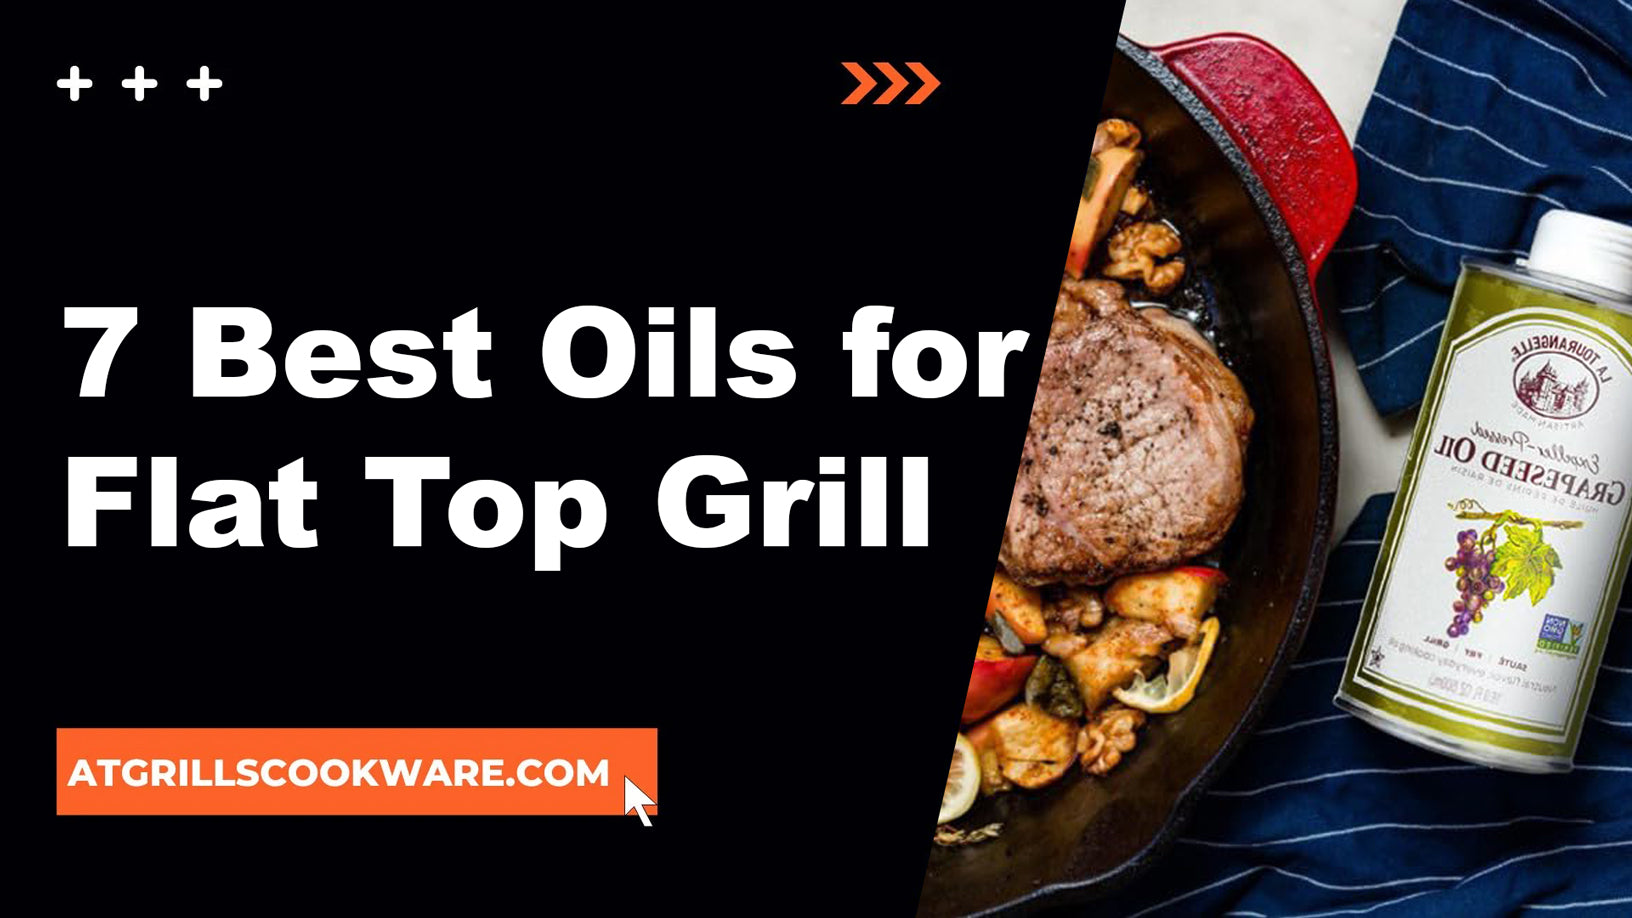 7 Best Oils for Flat Top Grill